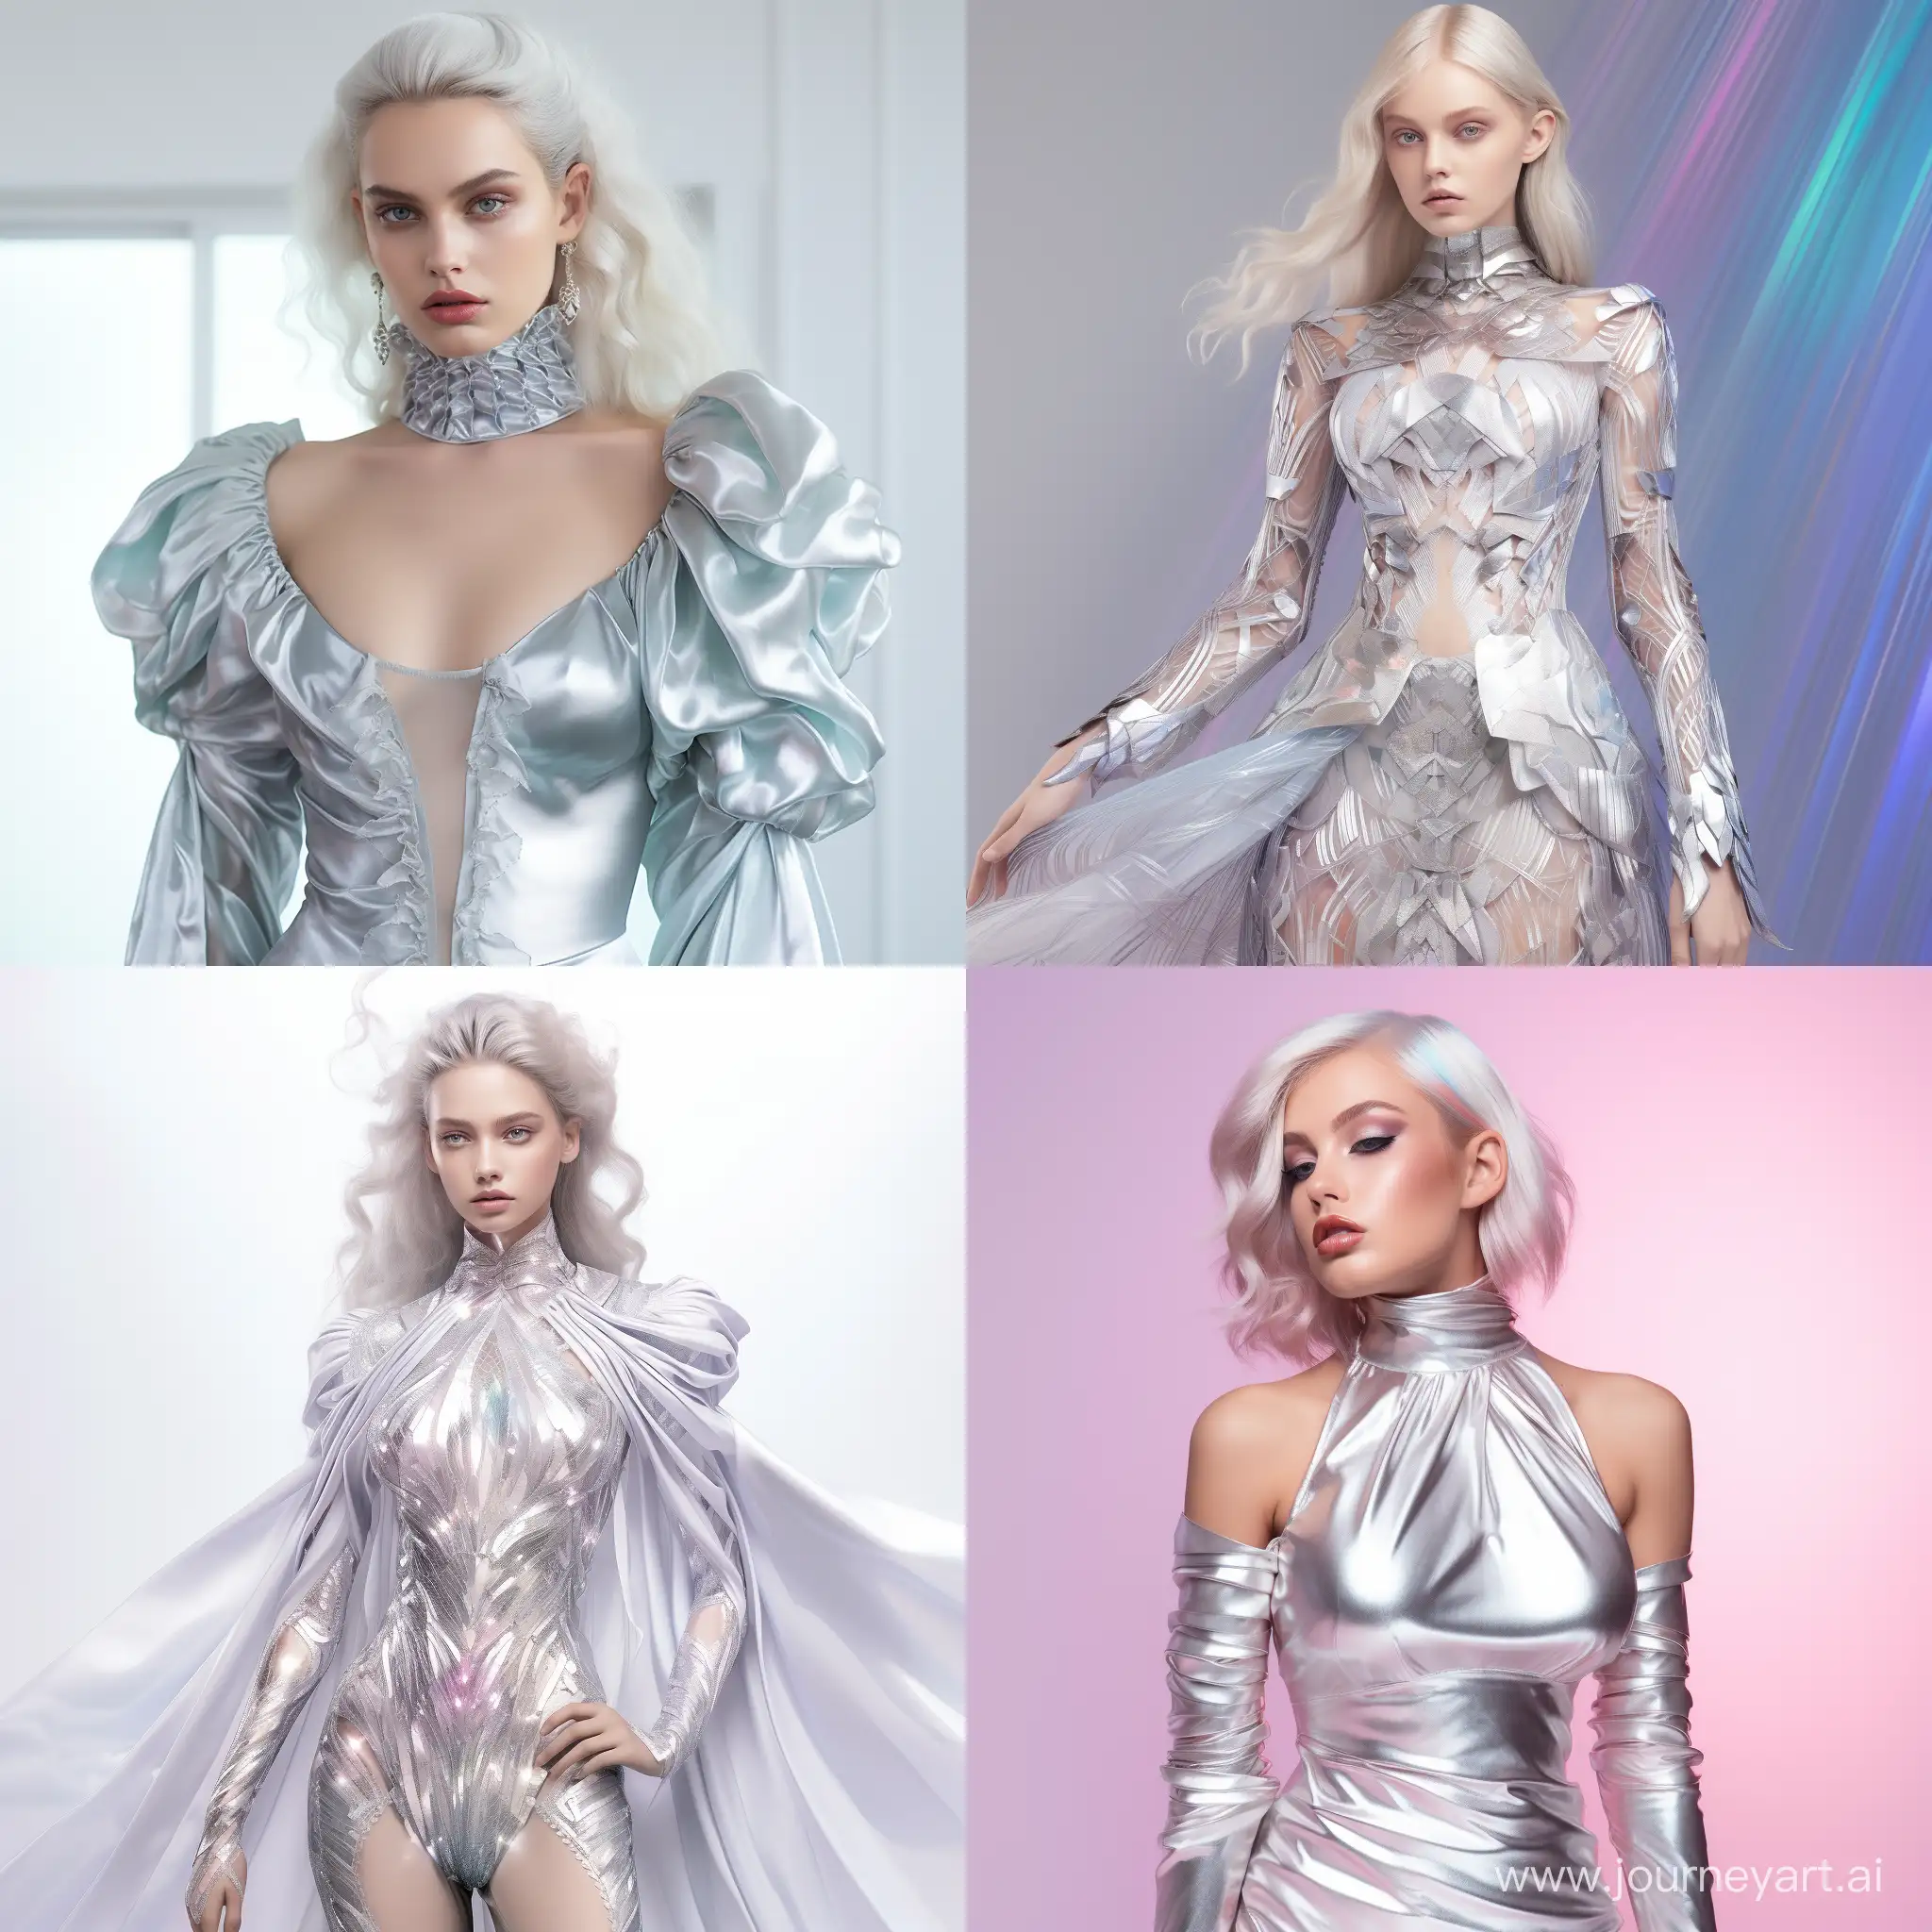 Elegant-Holographic-Dress-Design-with-Shiny-Silver-Accessories